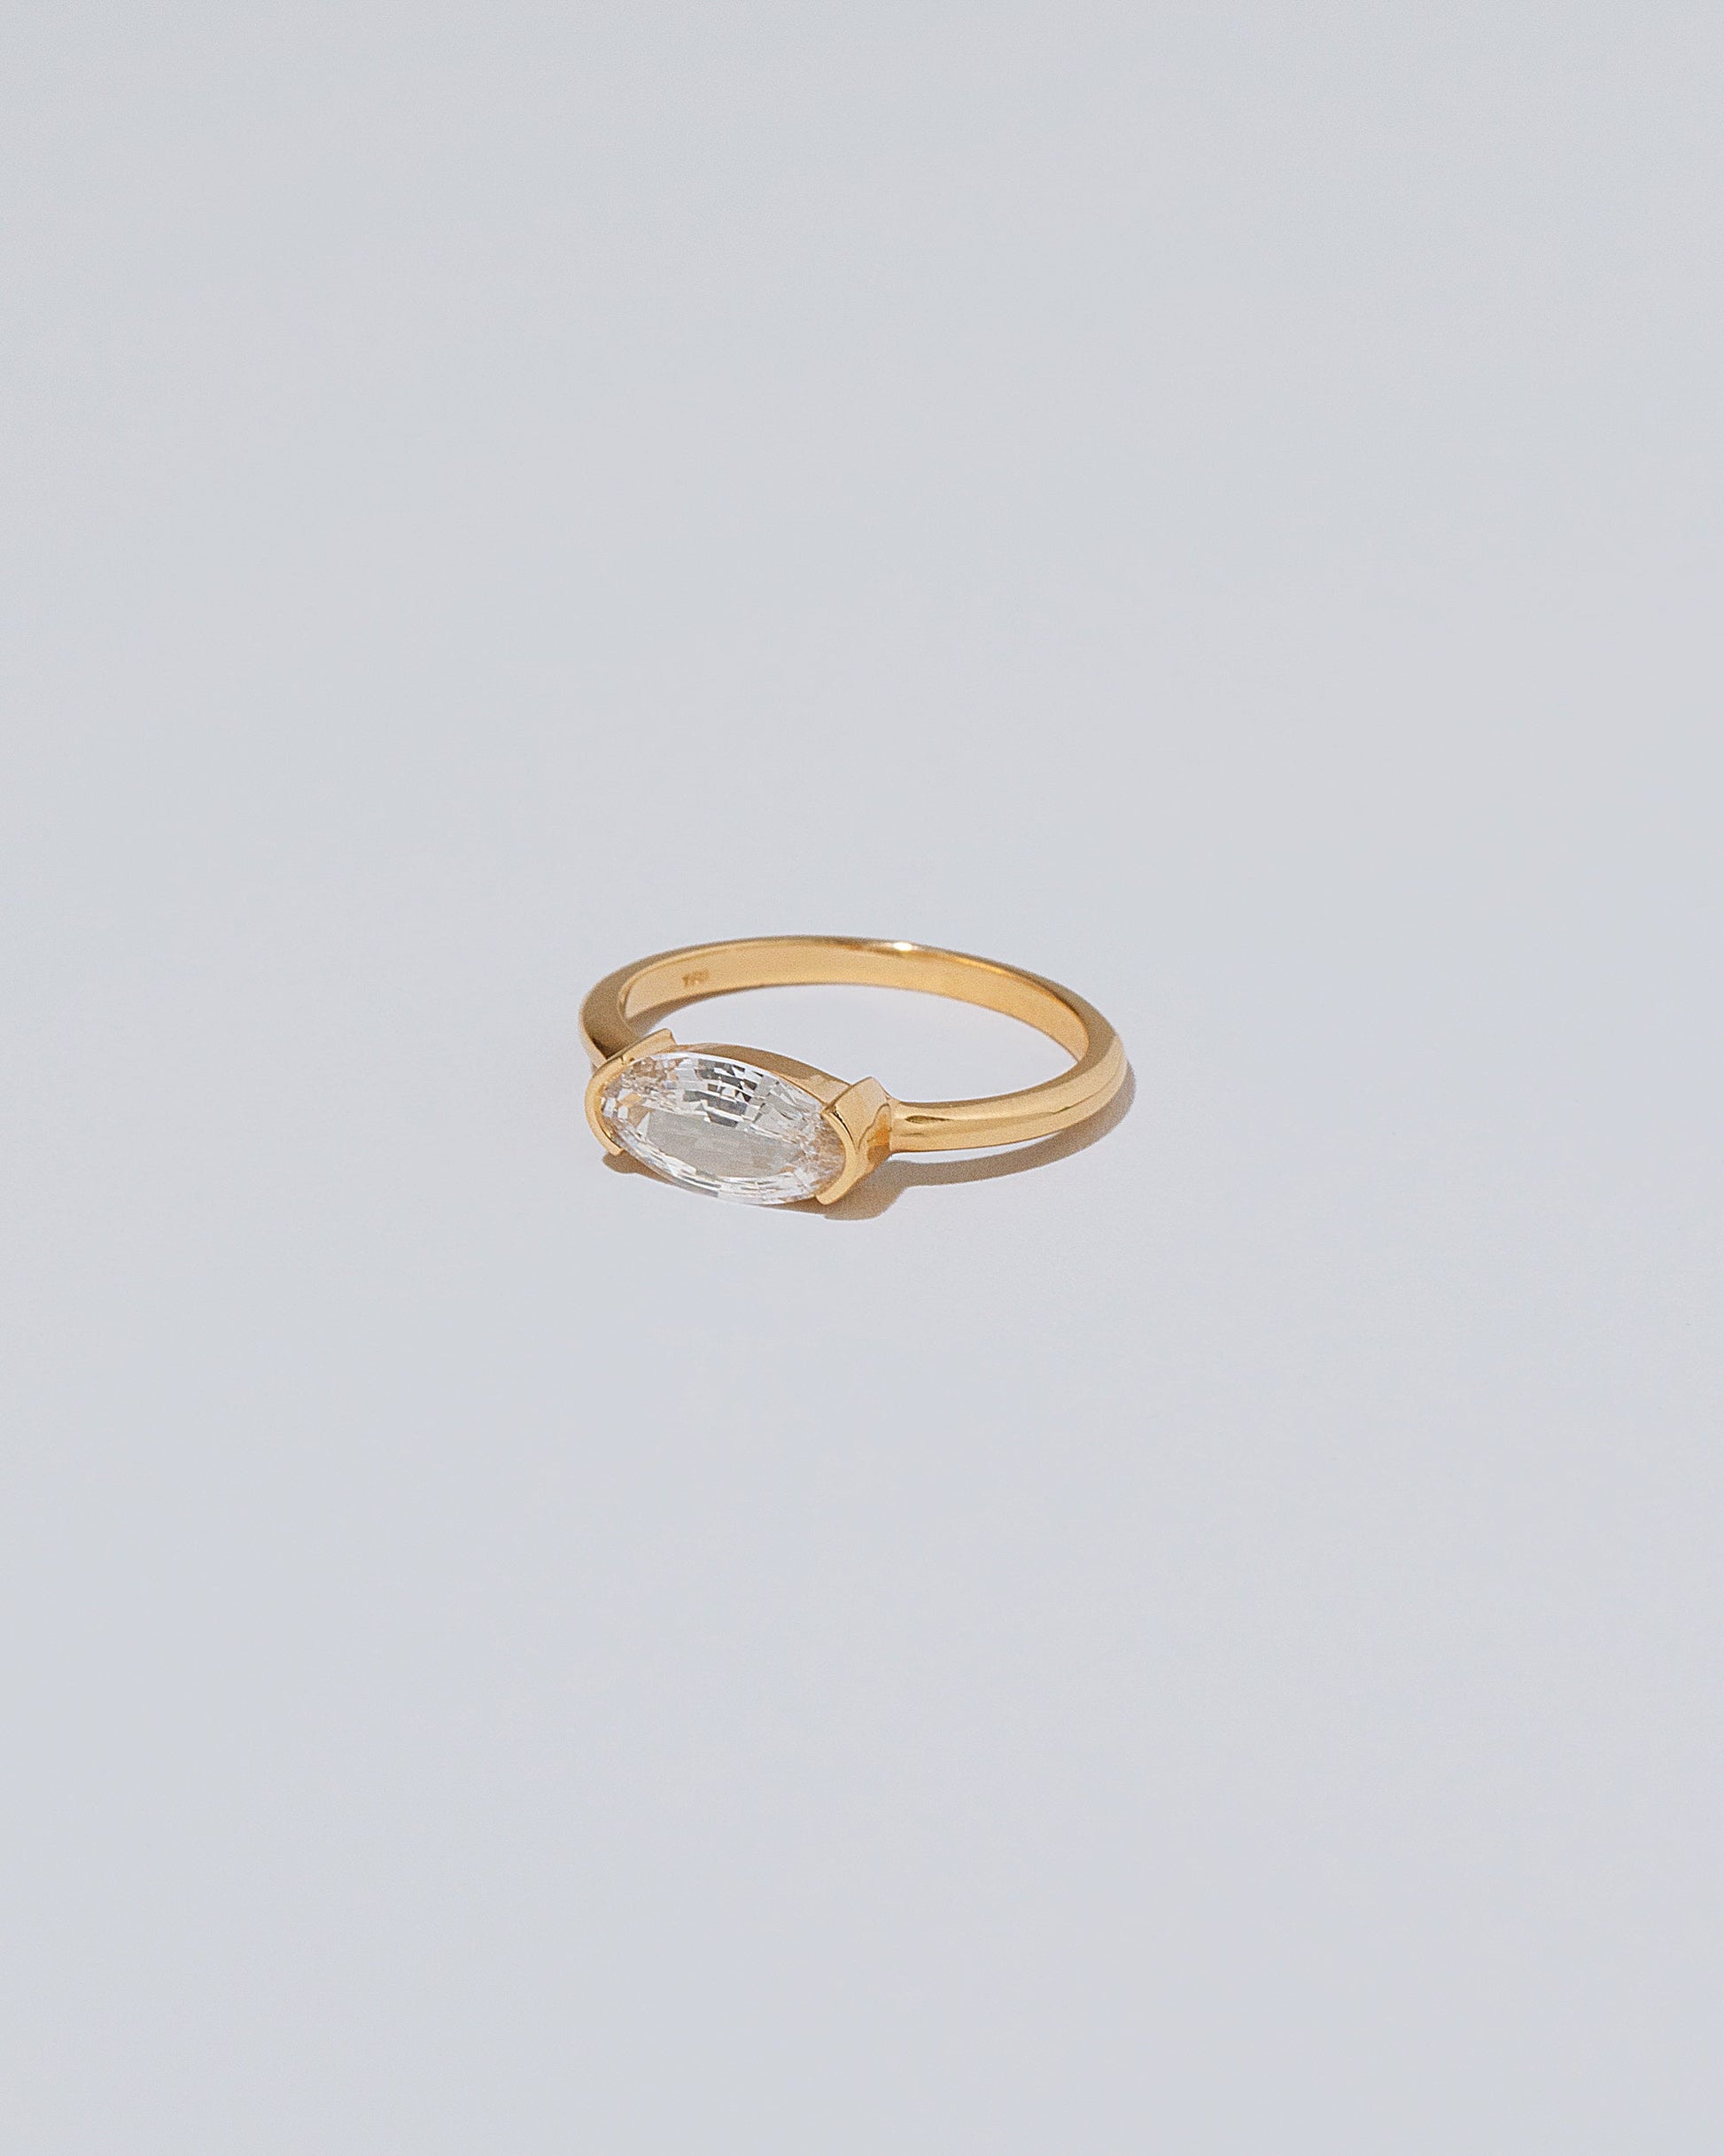 Product photo of the Jeté Ring on light color background